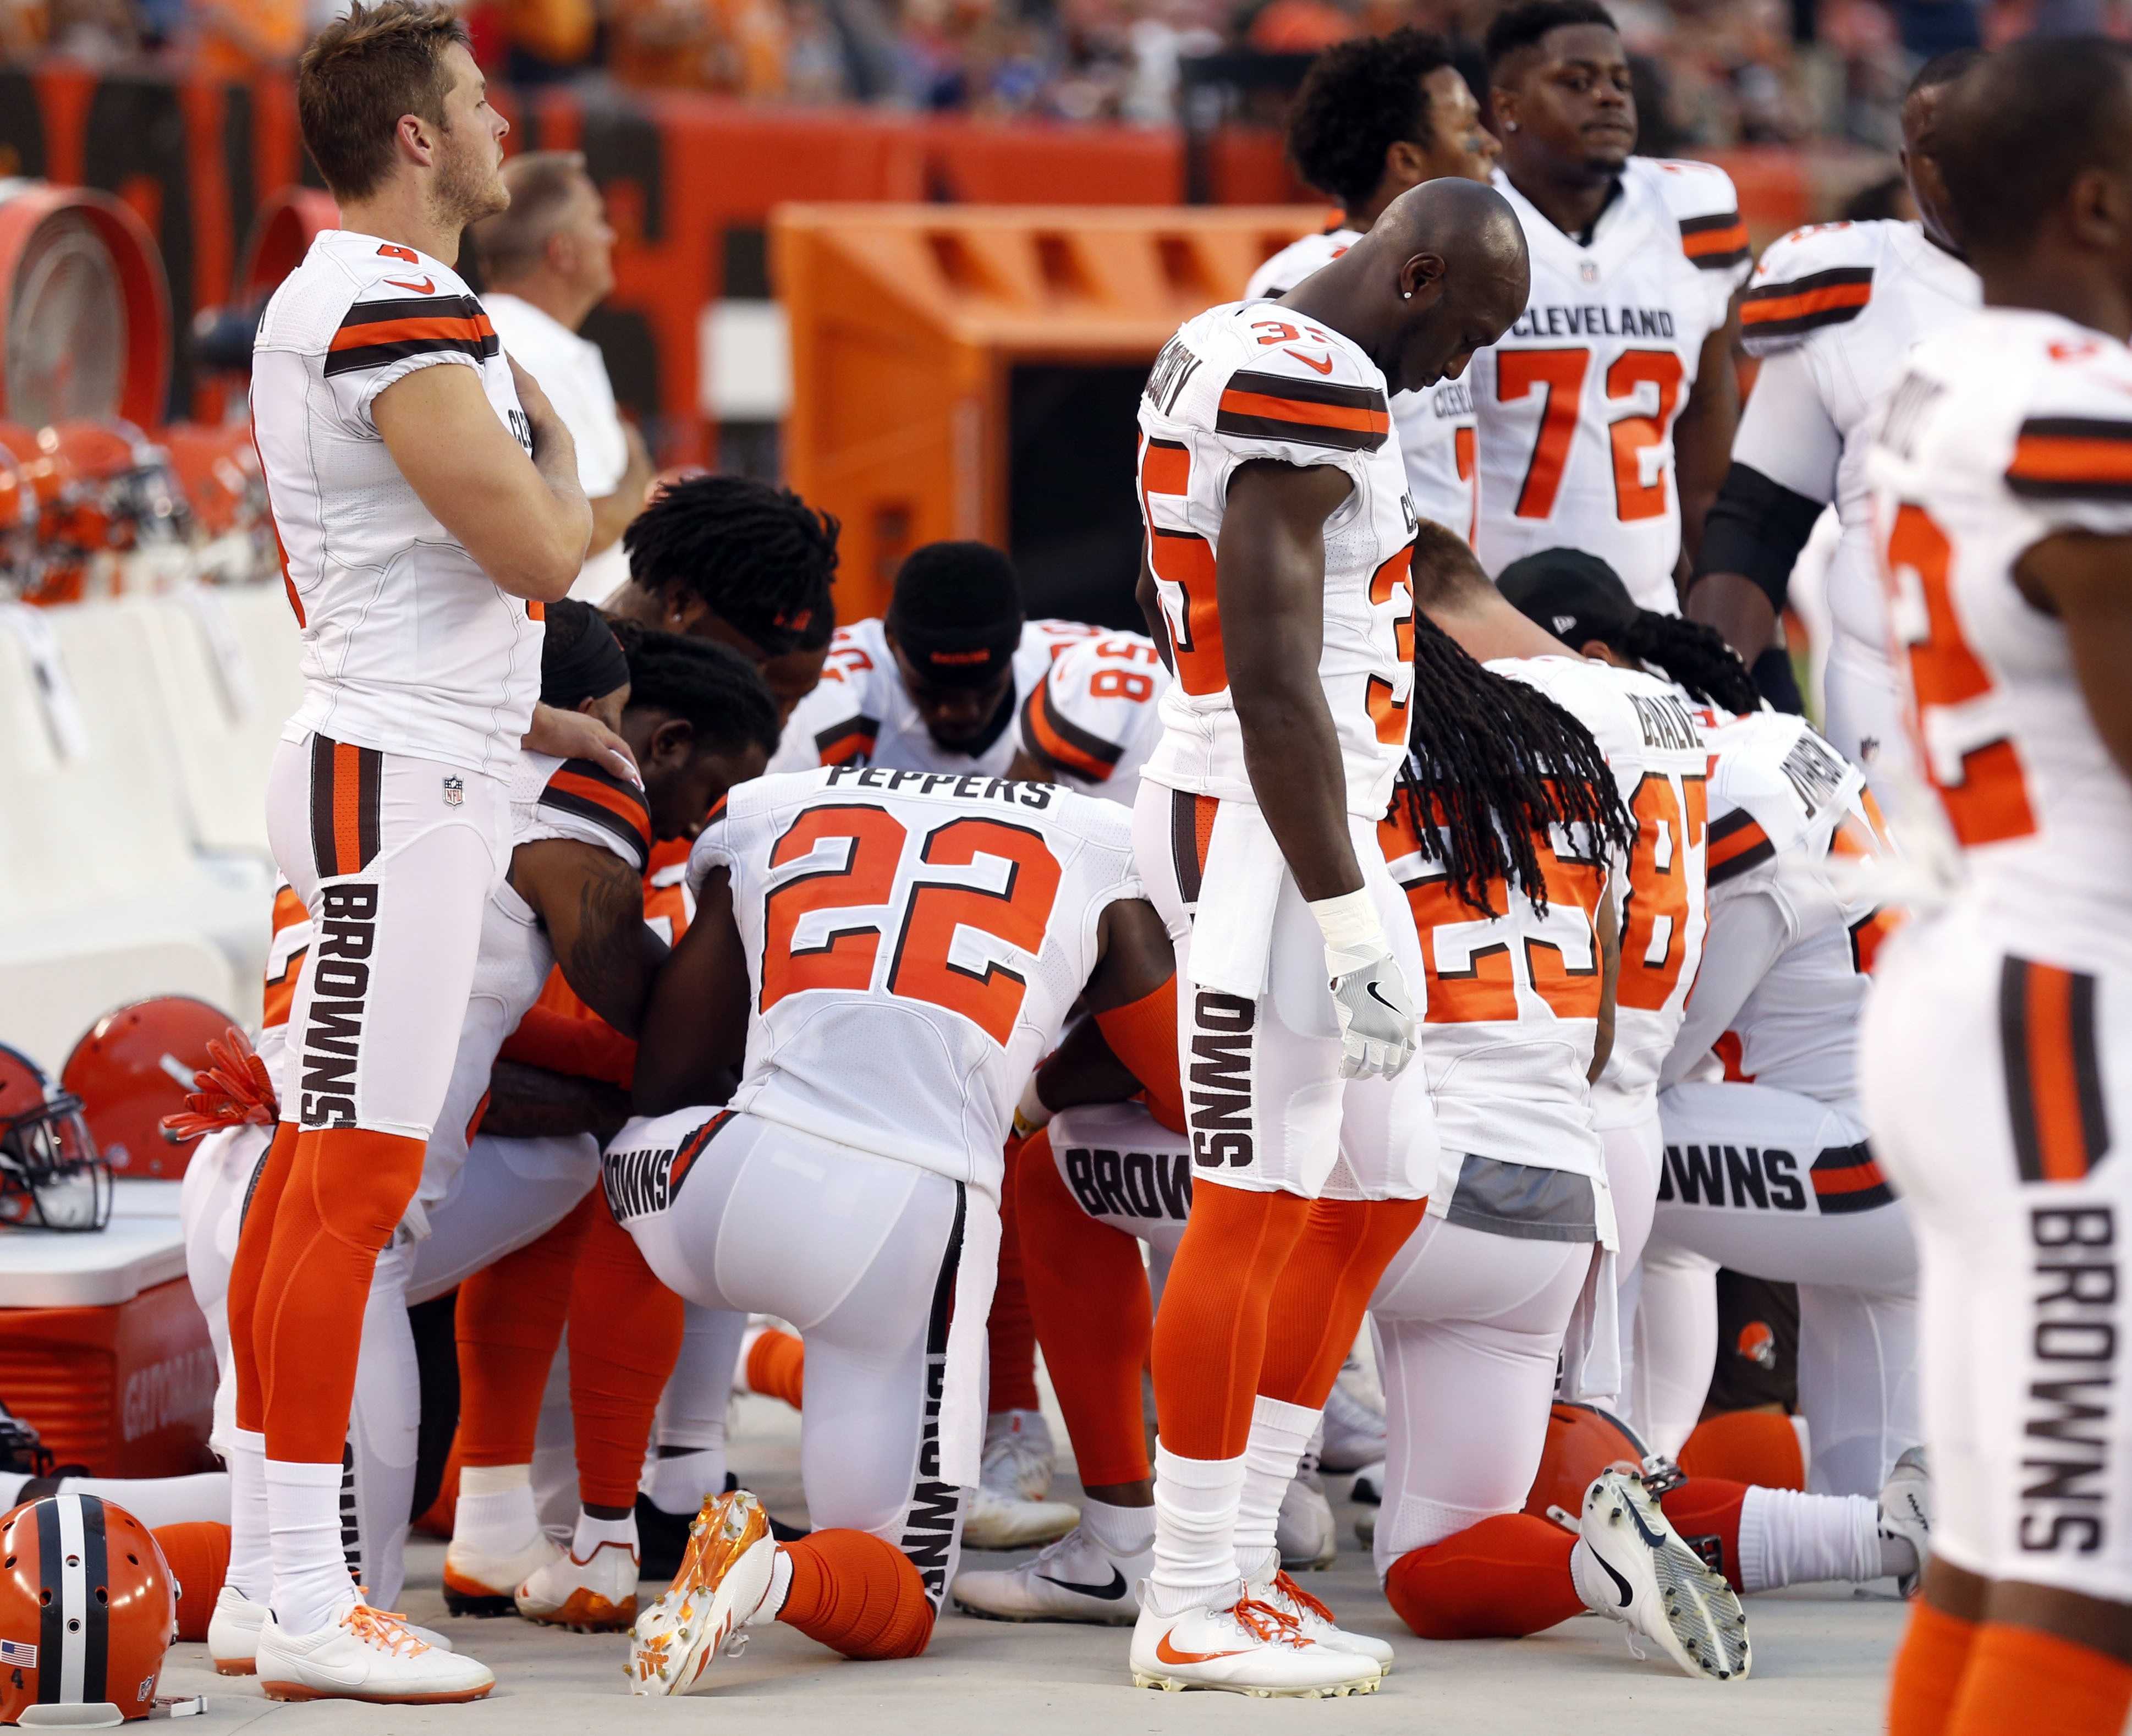 Police union refuses to participate in Browns' opening day